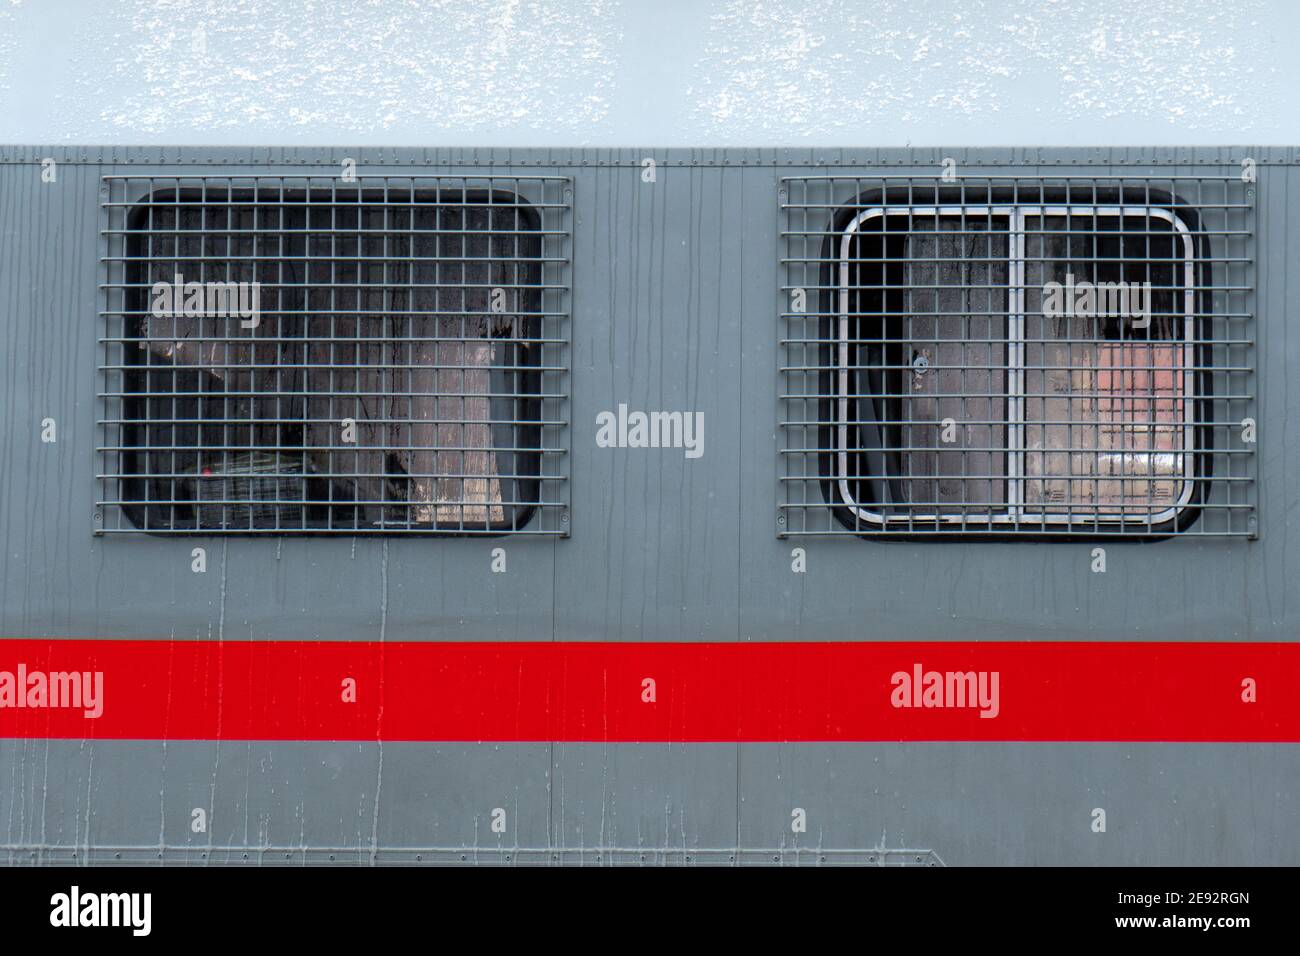 Steel bars on the windows of a russian riot police bus for arrested people at the political rally Stock Photo